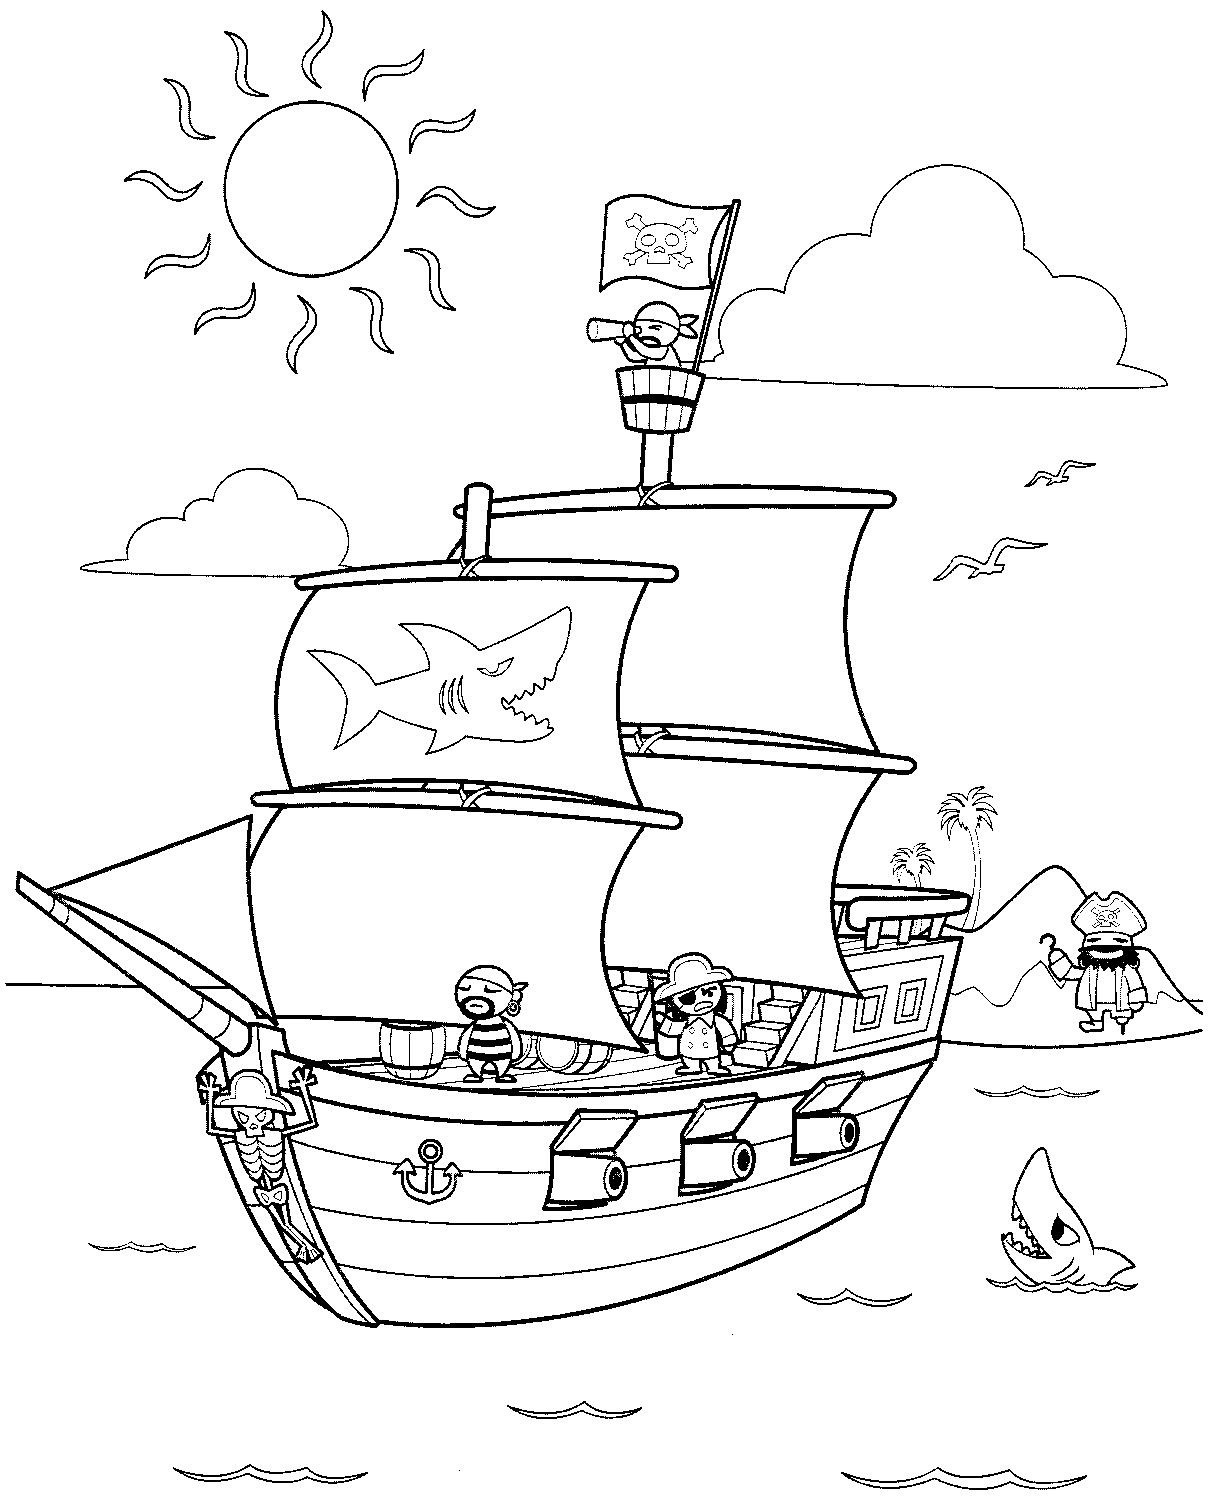 pirate ship to color pirate ship coloring pages getcoloringpagescom pirate ship color to 